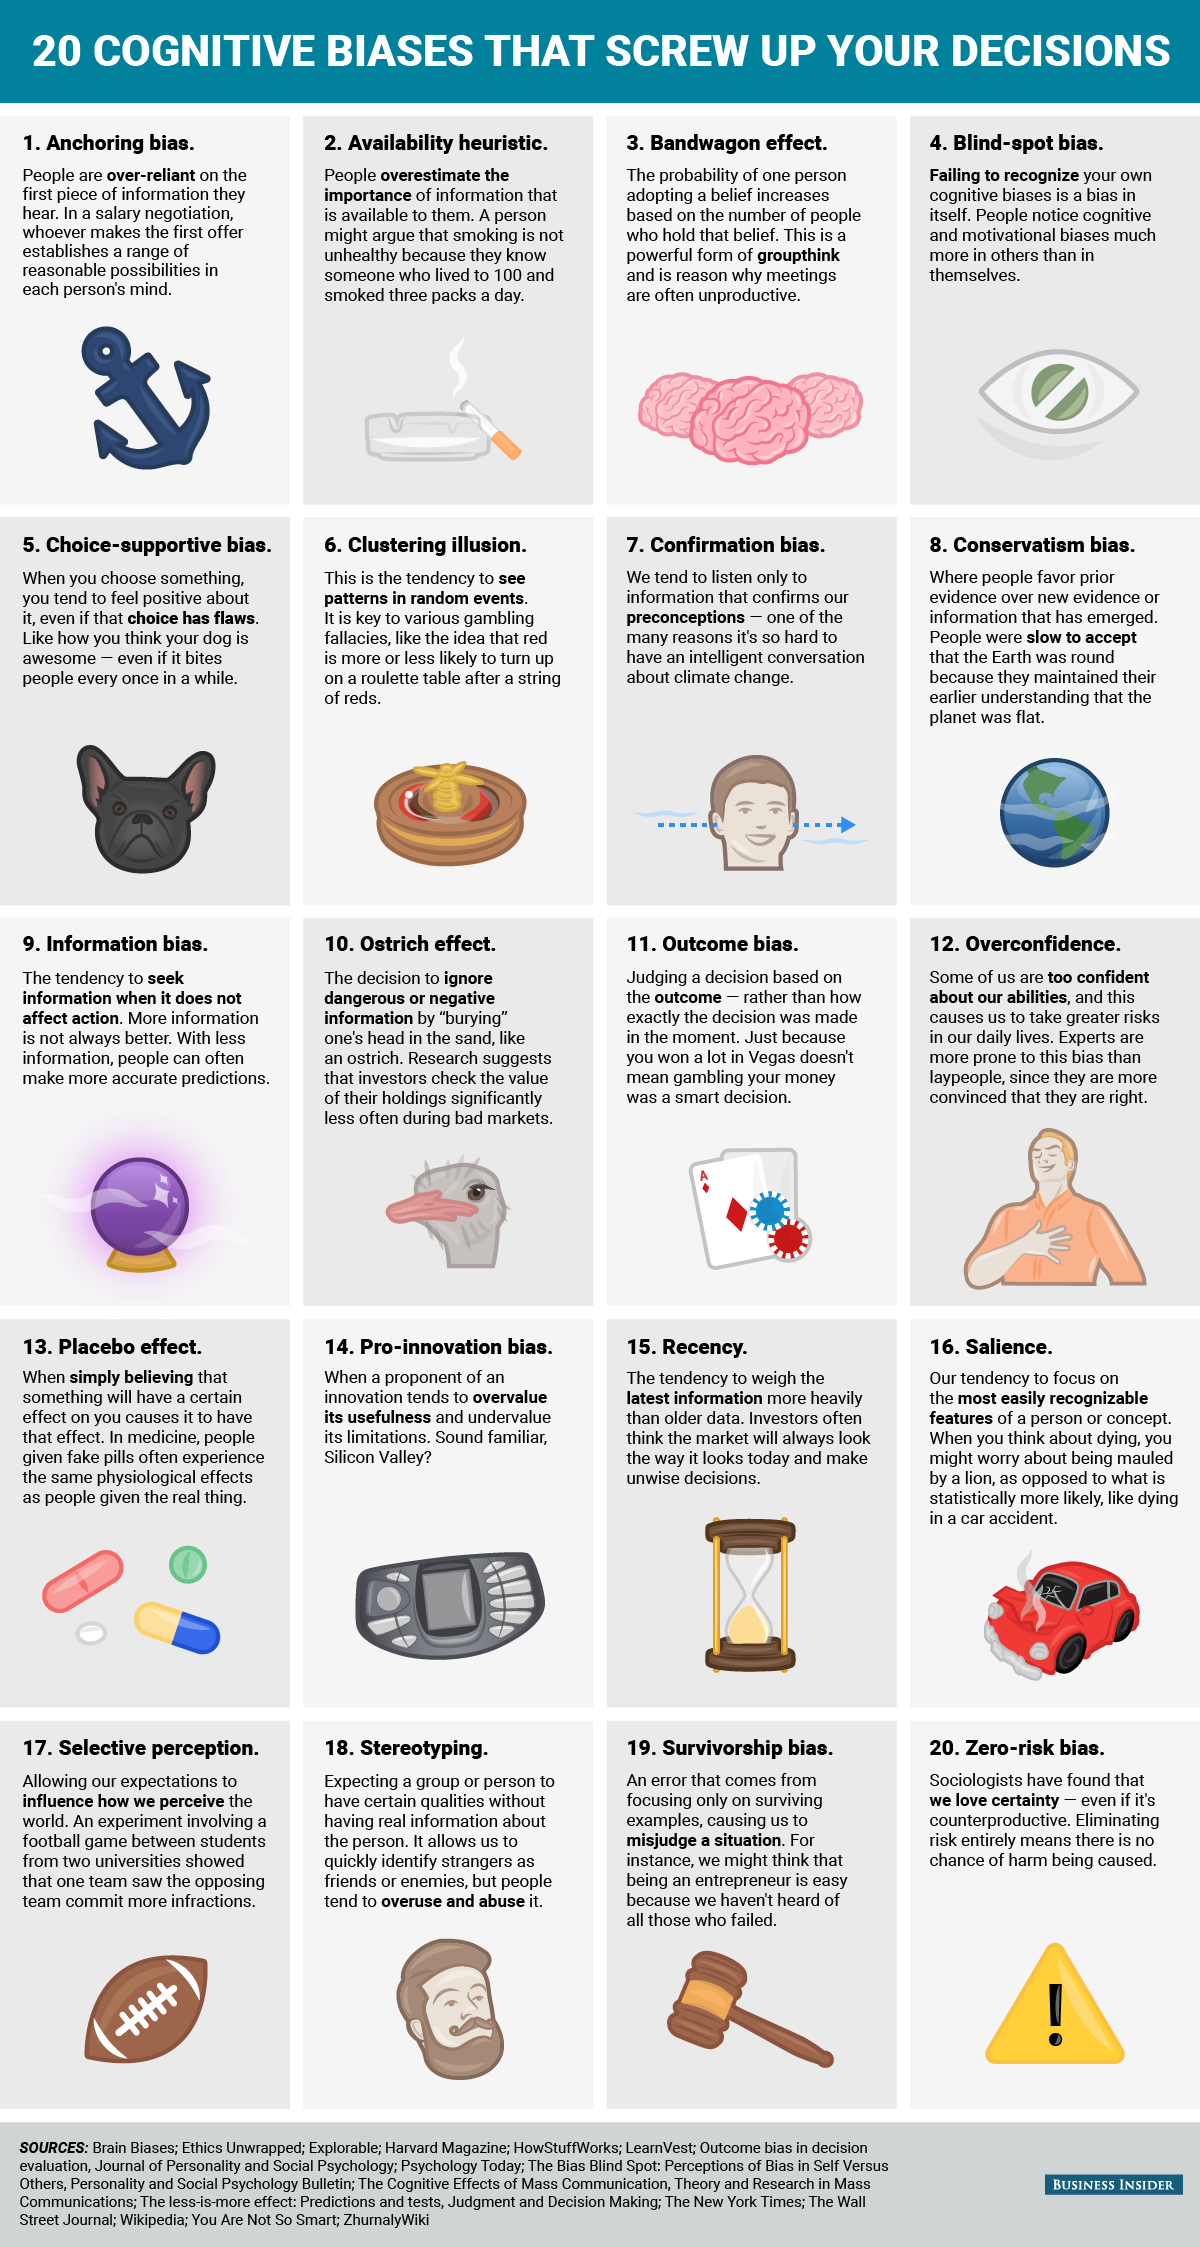 Infographic of 20 cognitive biases affecting decisions, including anchoring, availability, and confirmation biases.